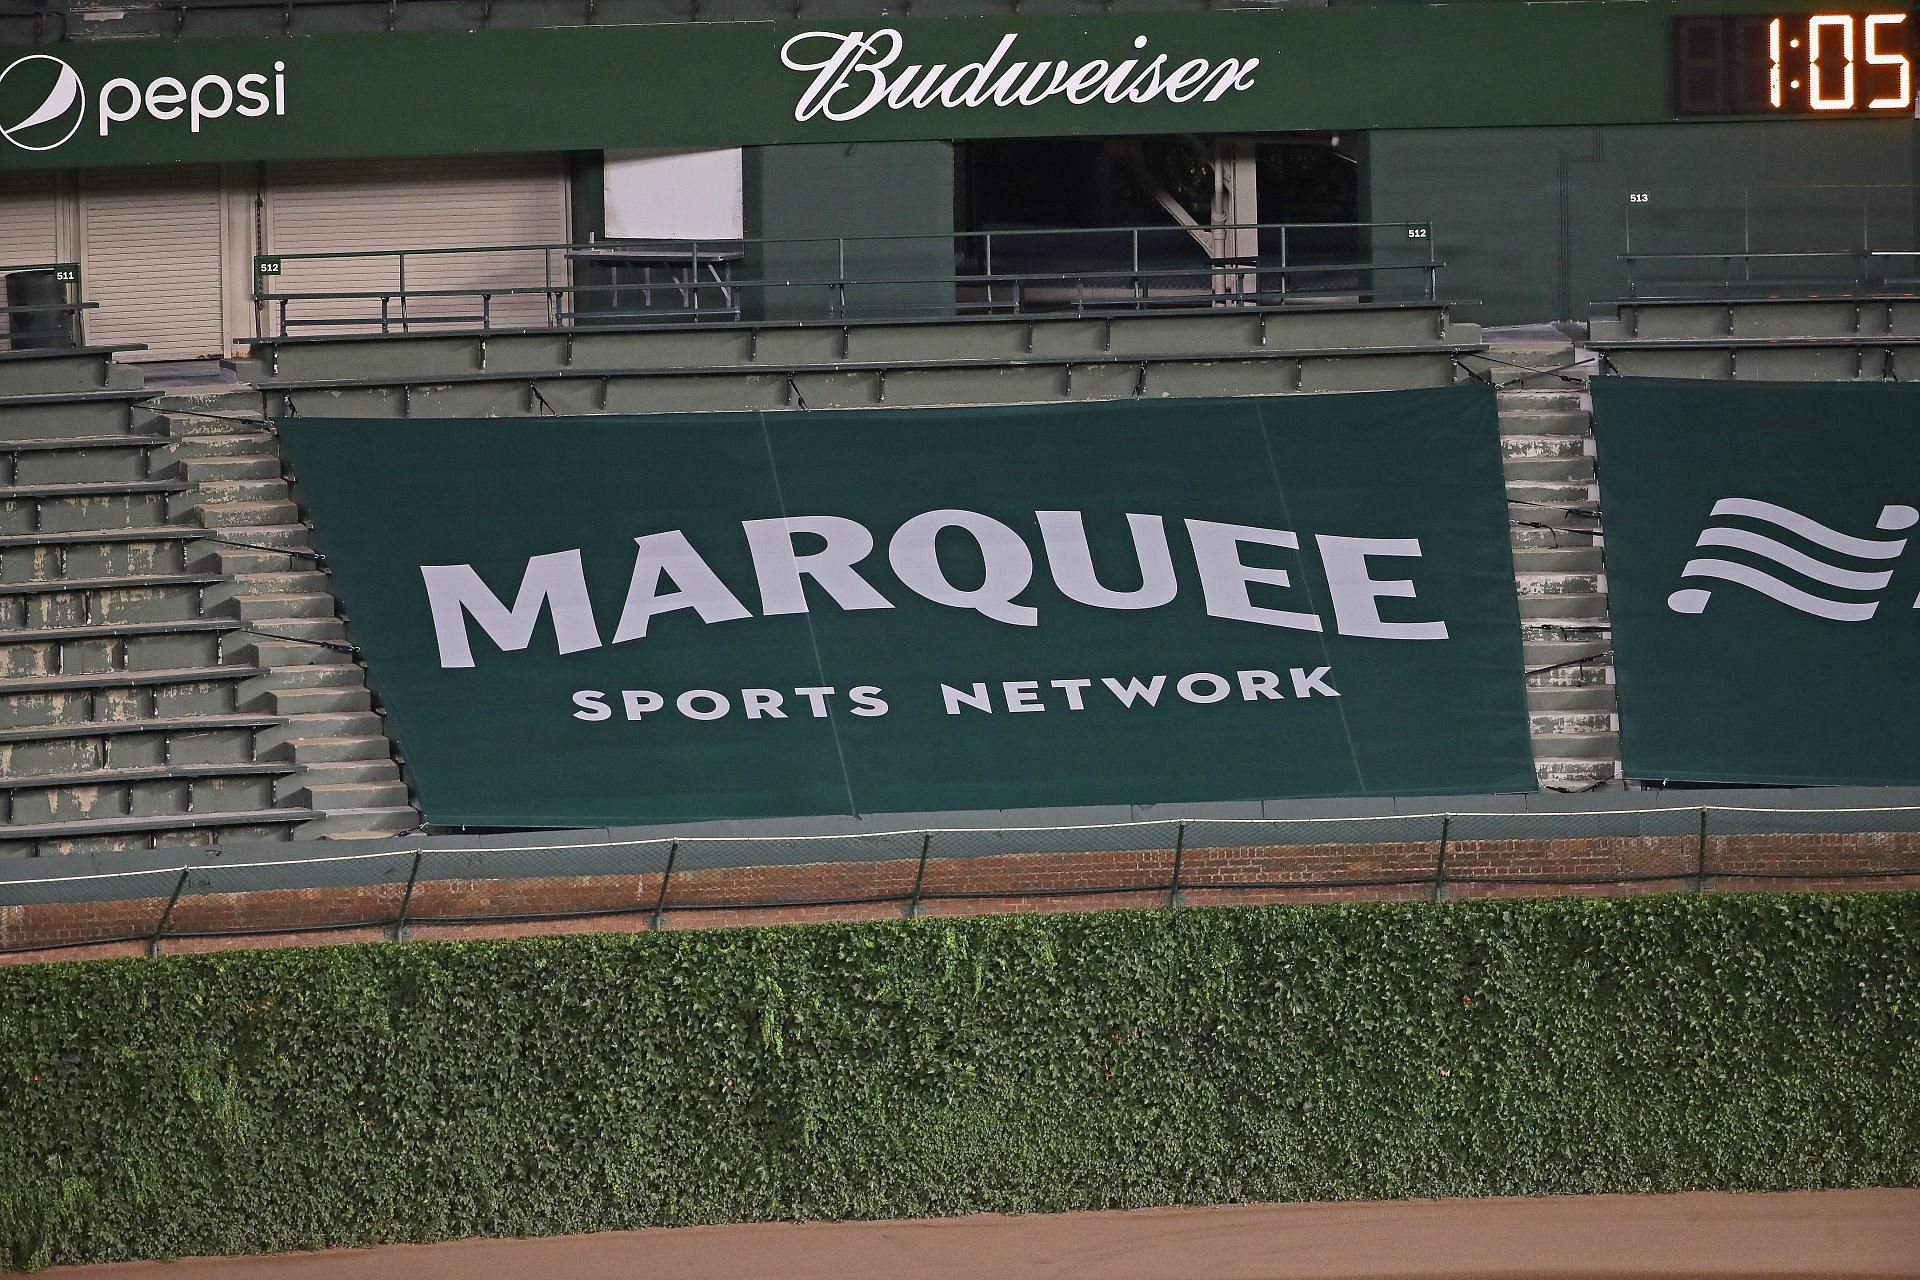 Marquee Sports Network - The TV Home of the Chicago Cubs